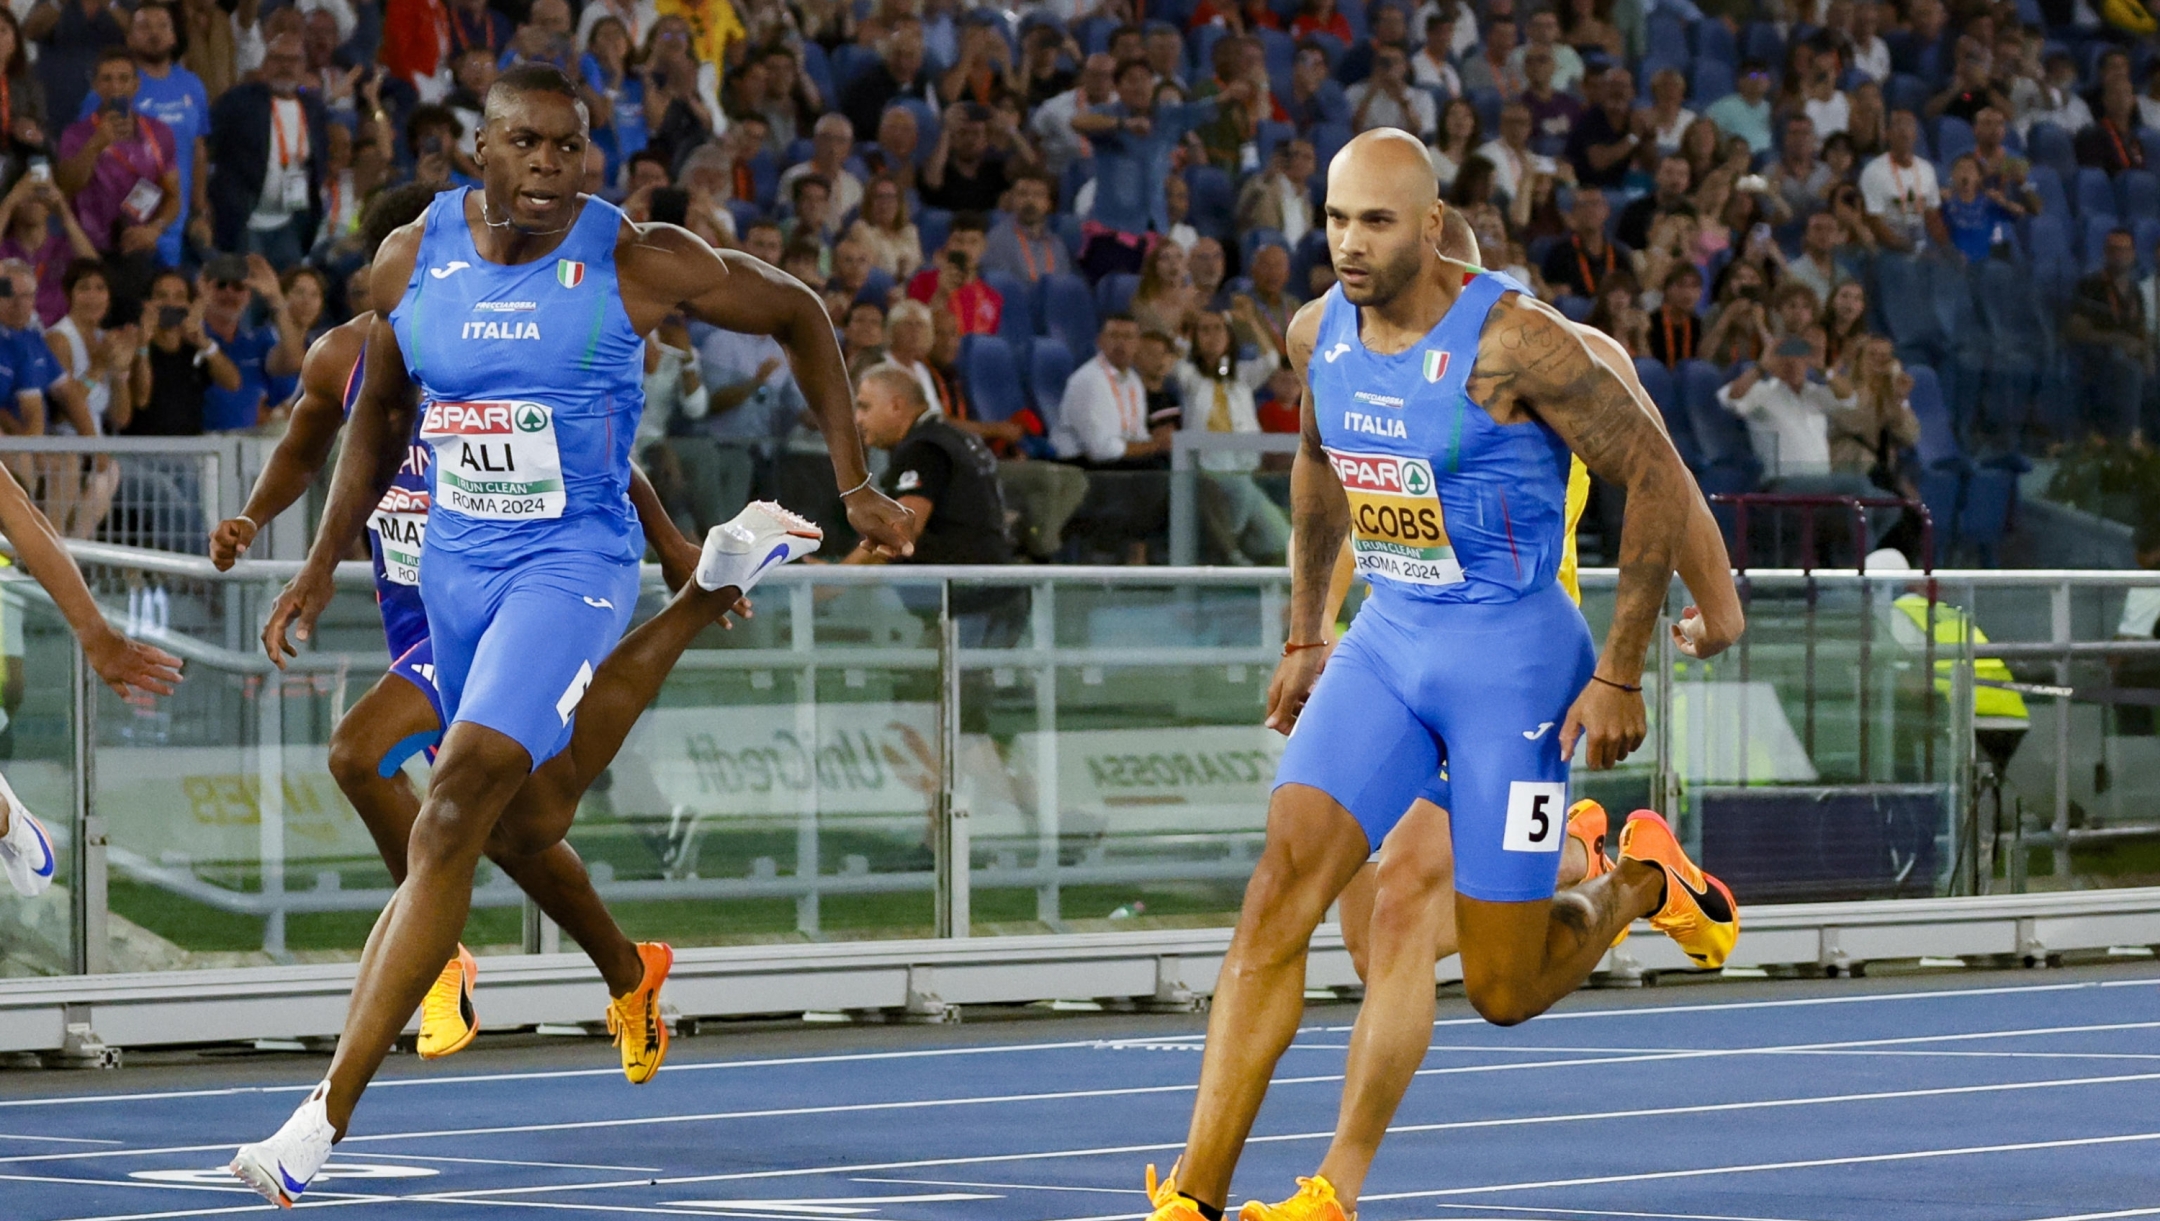 Chituru Ali (L) of Italy and Marcell Jacobs of Italy compete at the 100m Men Final during the European Athletics Championship at Olimpico Stadium in Rome, Italy, 08 June 2024. ANSA/FABIO FRUSTACI